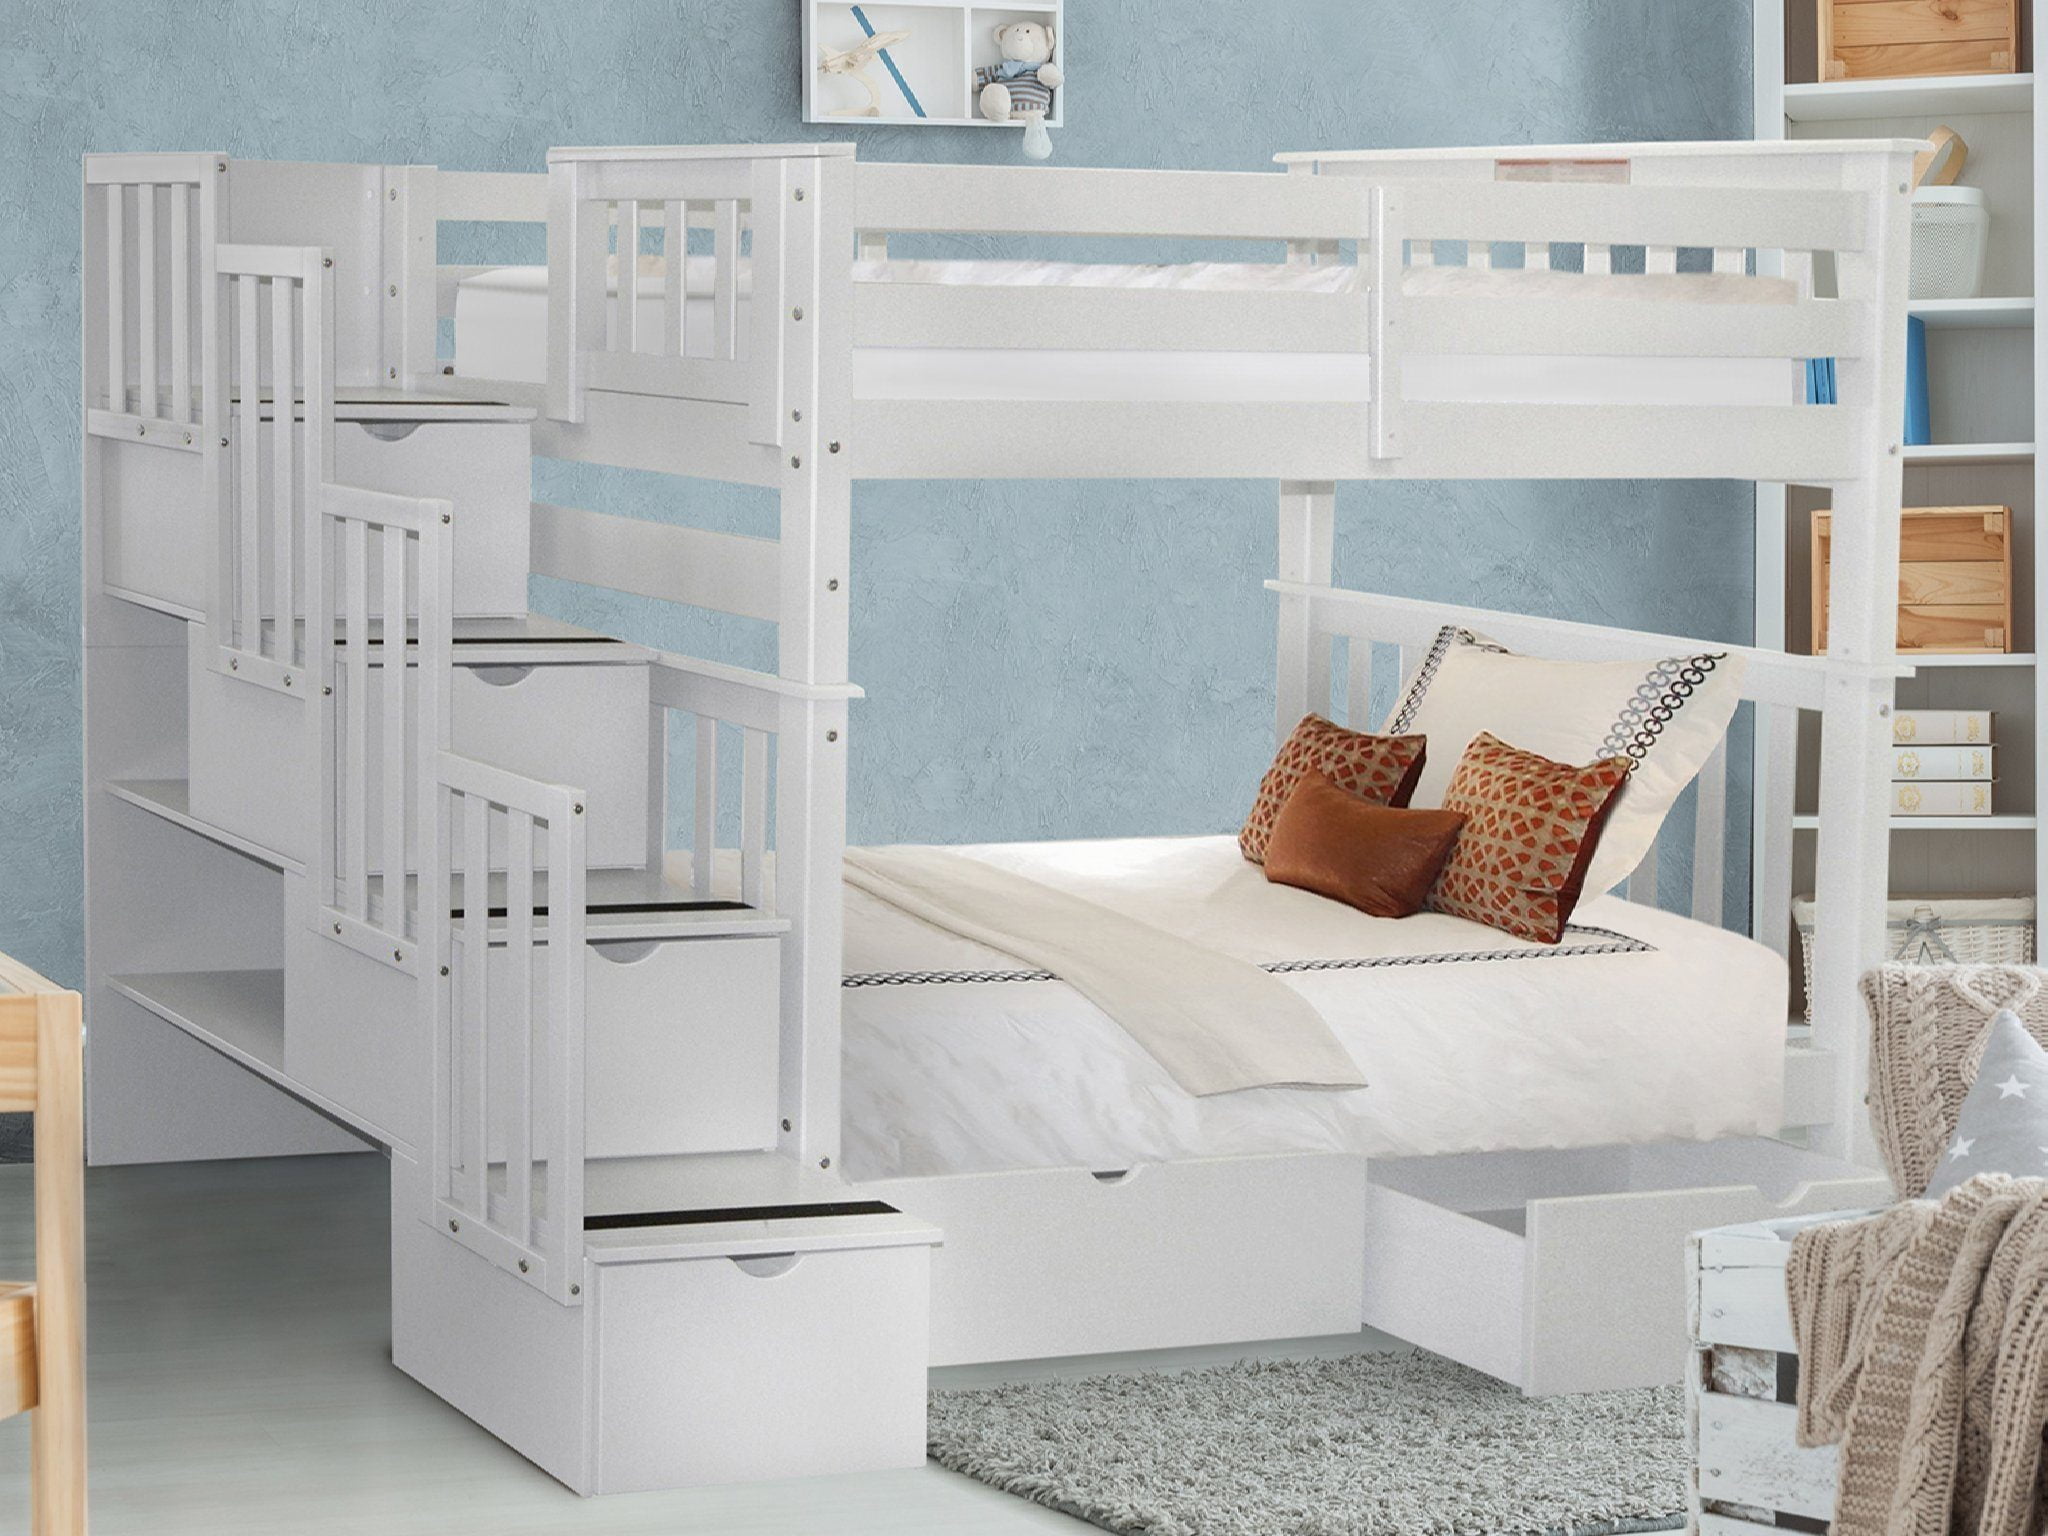 Bedz King Tall Stairway Bunk Beds Twin, Step 2 Plastic Bunk Bed